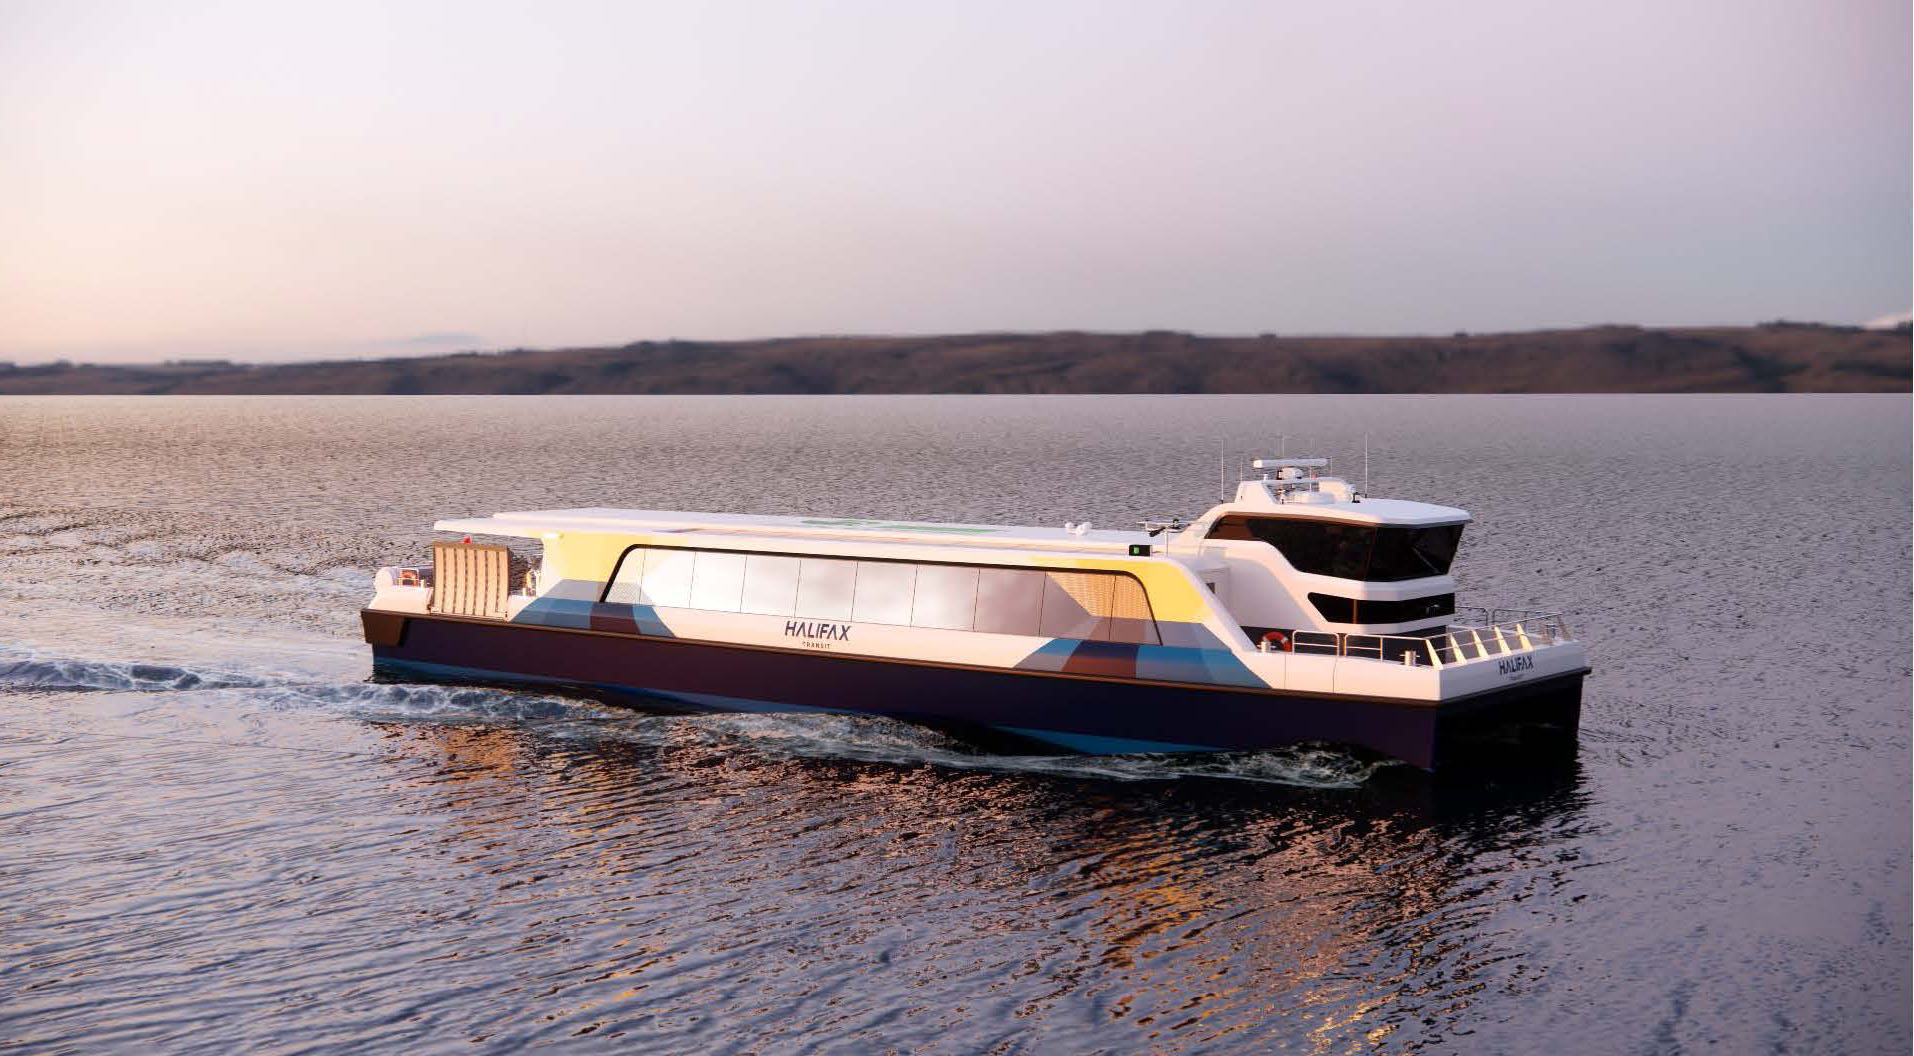 Proposed electric ferries with capacity for 150 passengers.